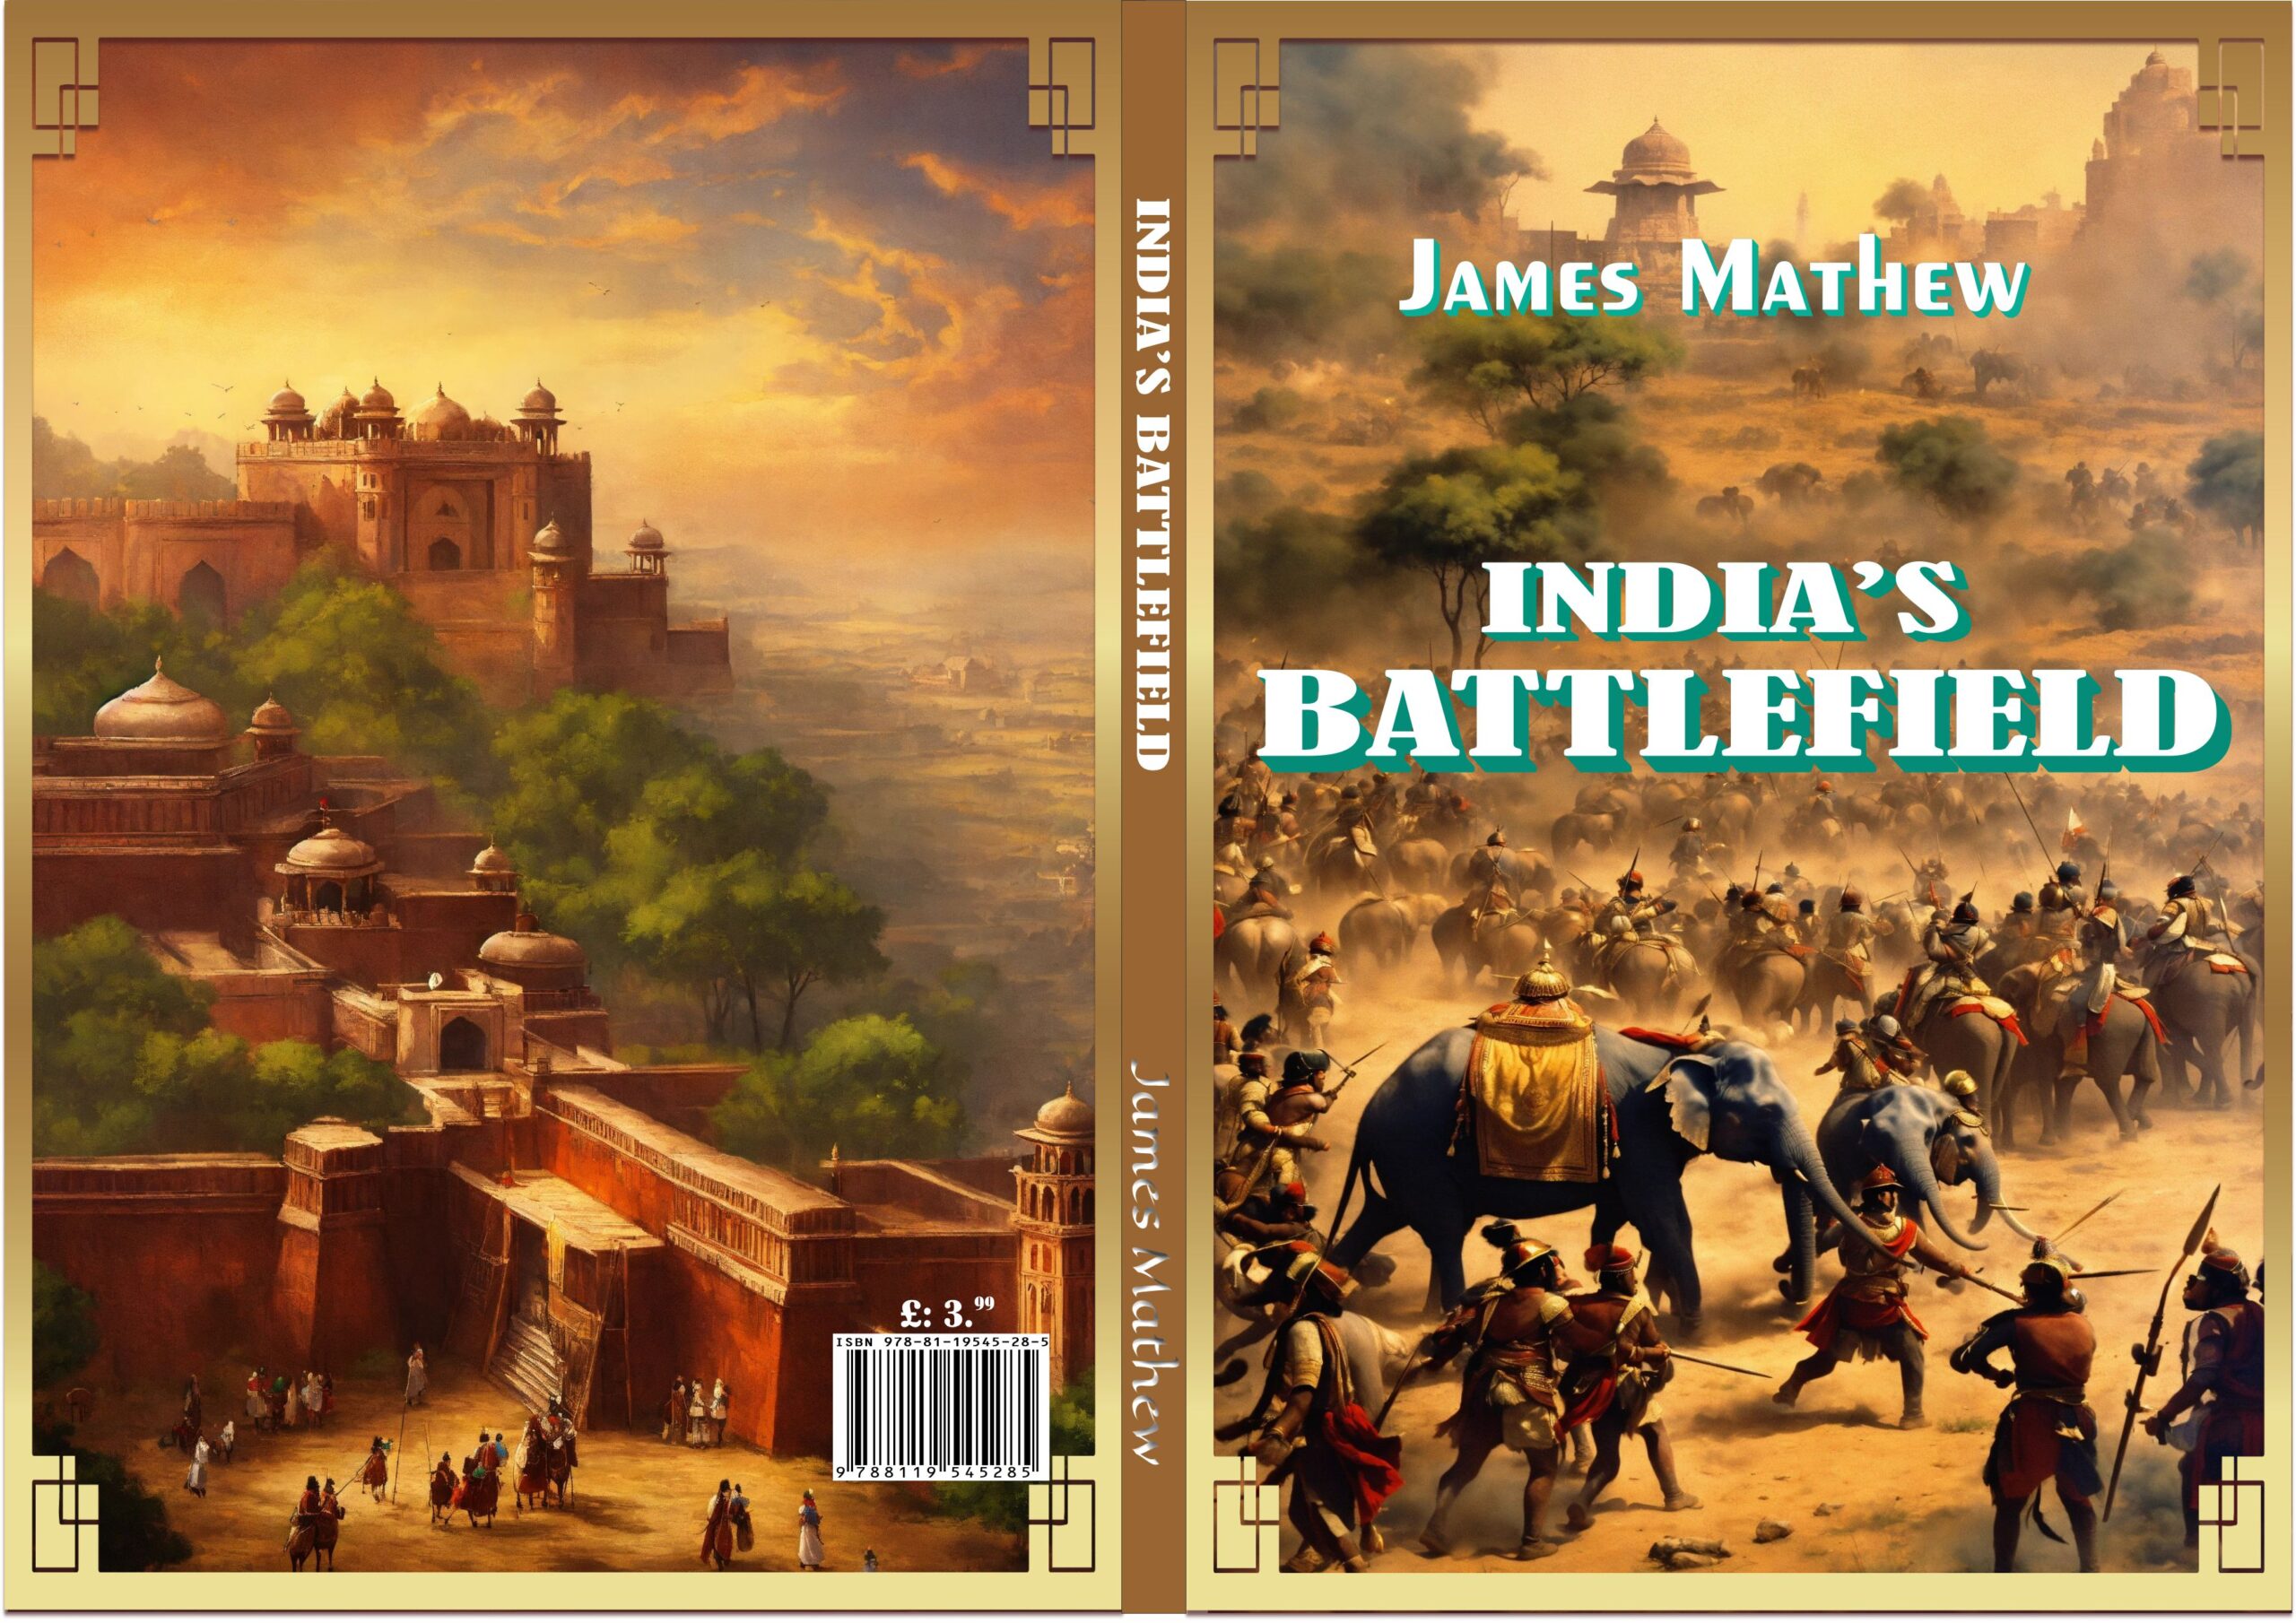 Cover Page of India's battlefield